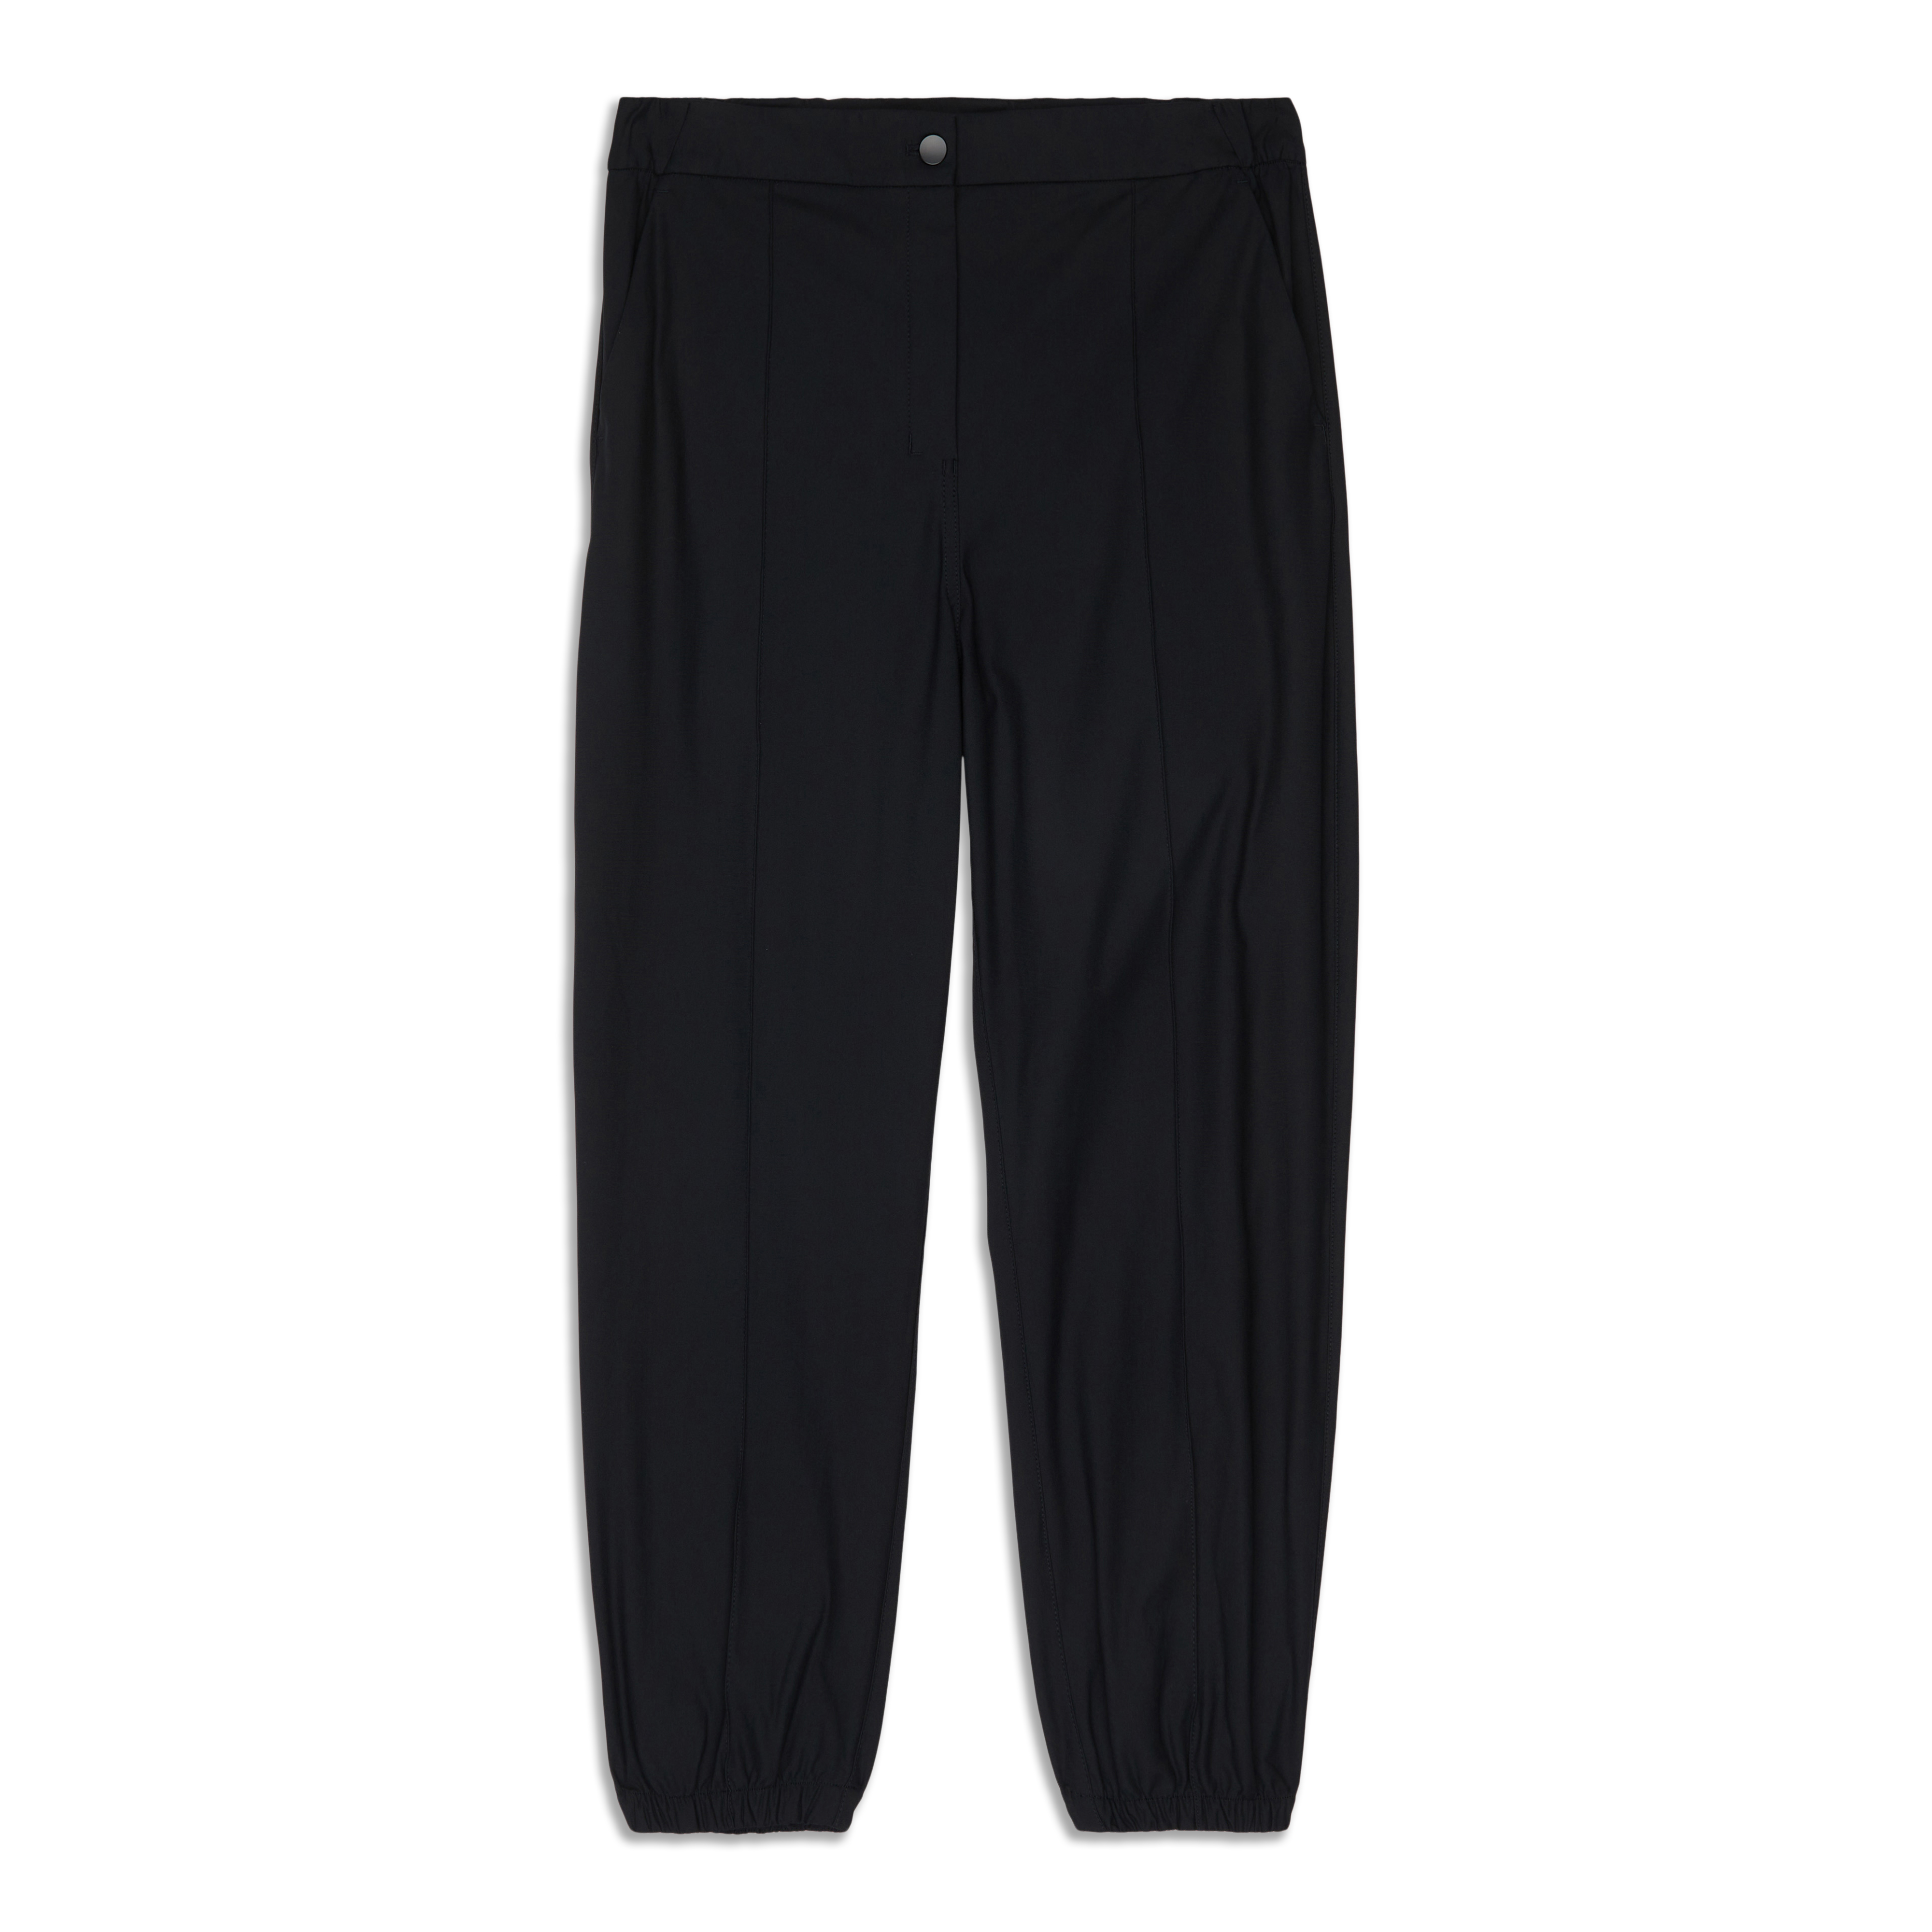 Warm Down Joggers 7/8 Length in 2023  Joggers womens, Lululemon joggers  women, Warm down